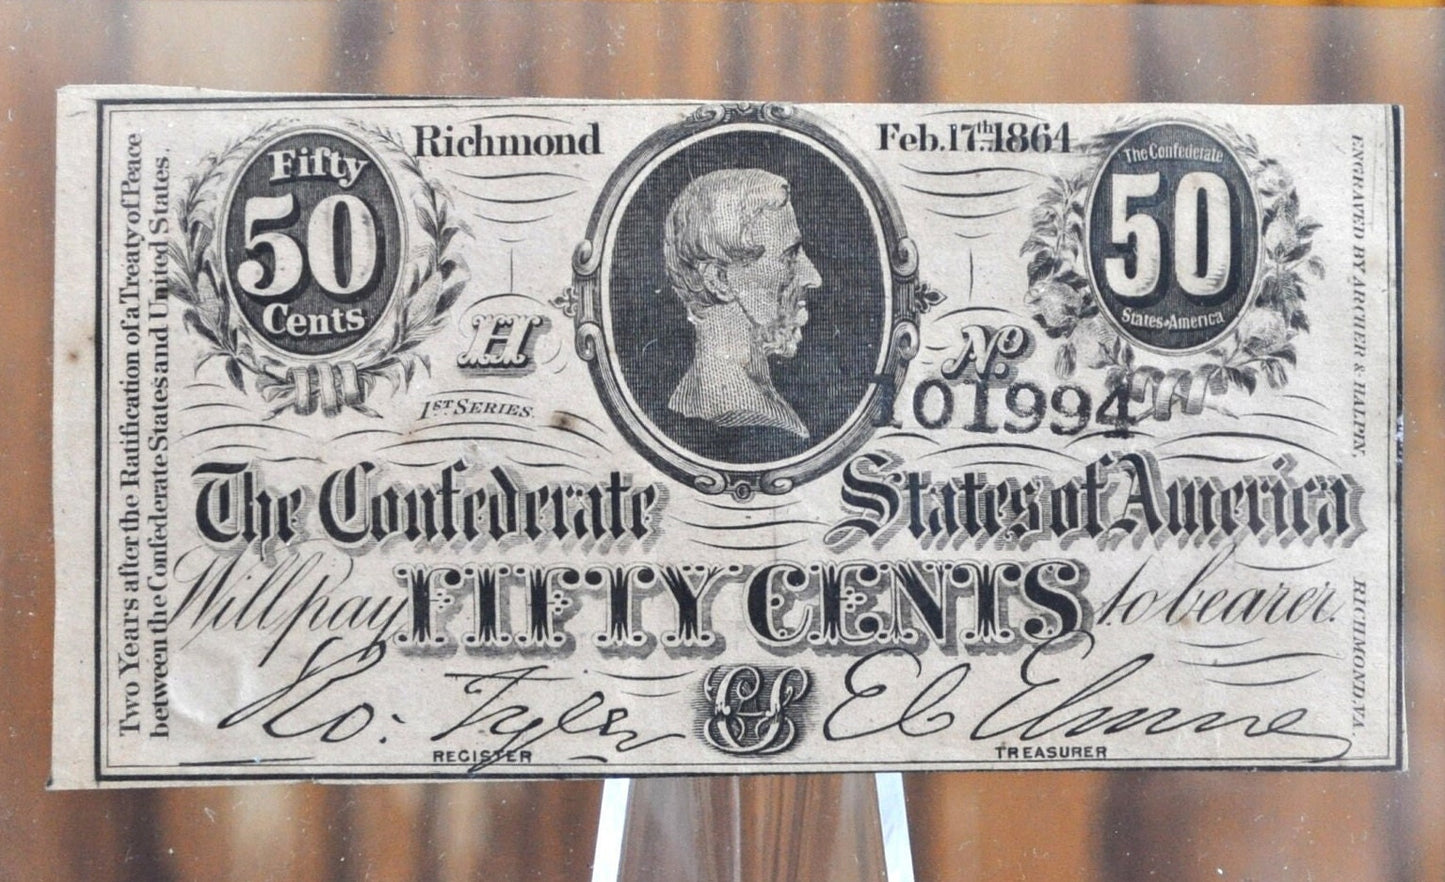 1864 50 Cent Fractional Currency - AU (About Uncirculated) Grade/Condition - Confederate Fractional Note Fifty Cent Jefferson Davis Type